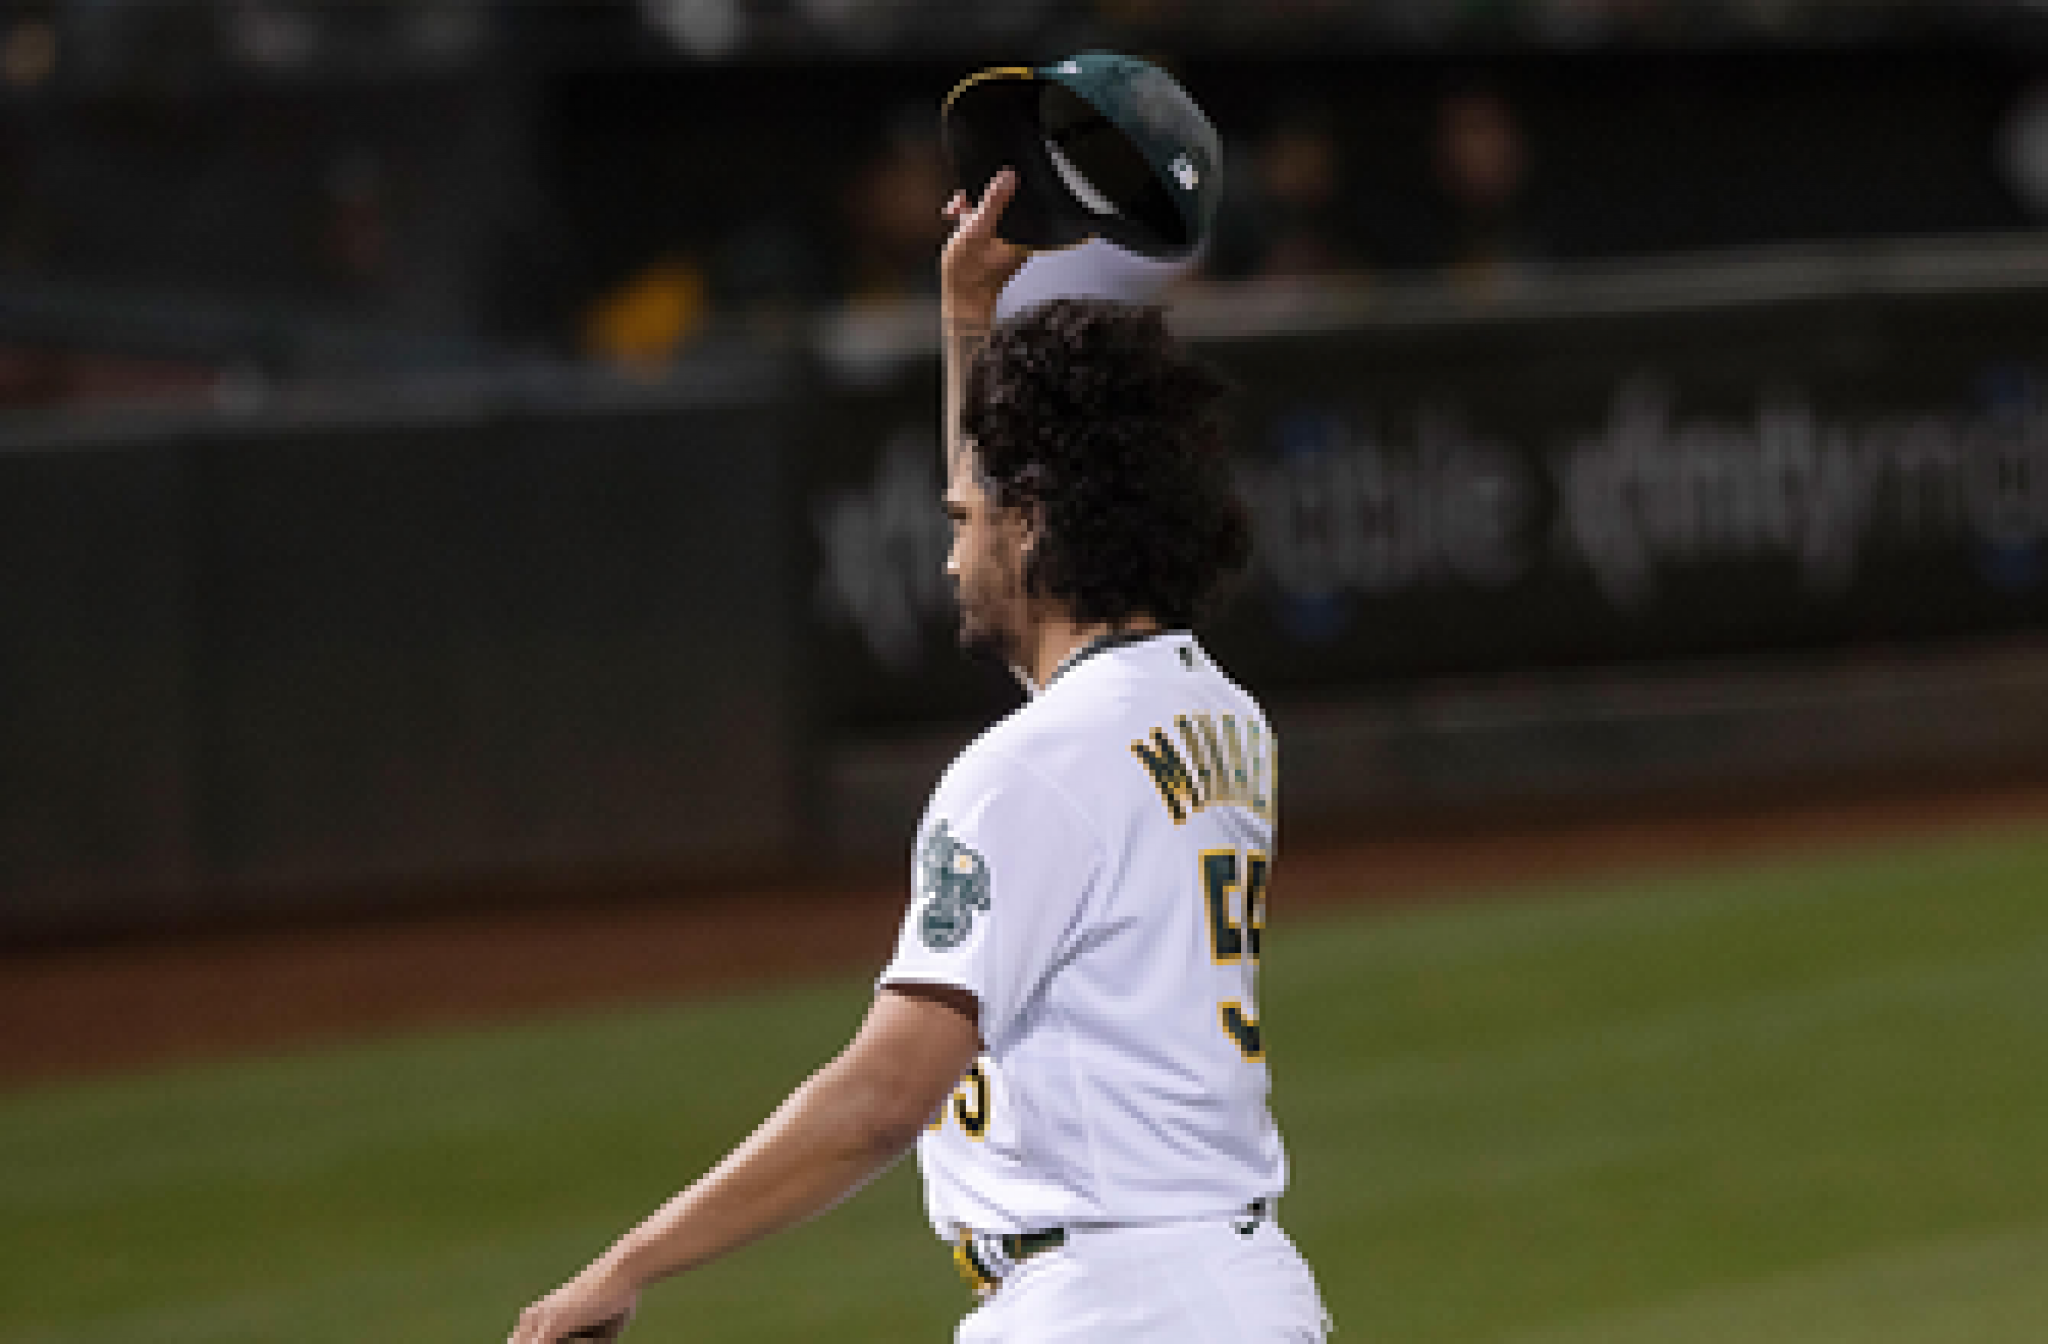 Sean Manaea takes no-hitter into the eighth as Athletics walk-off against Rays, 2-1